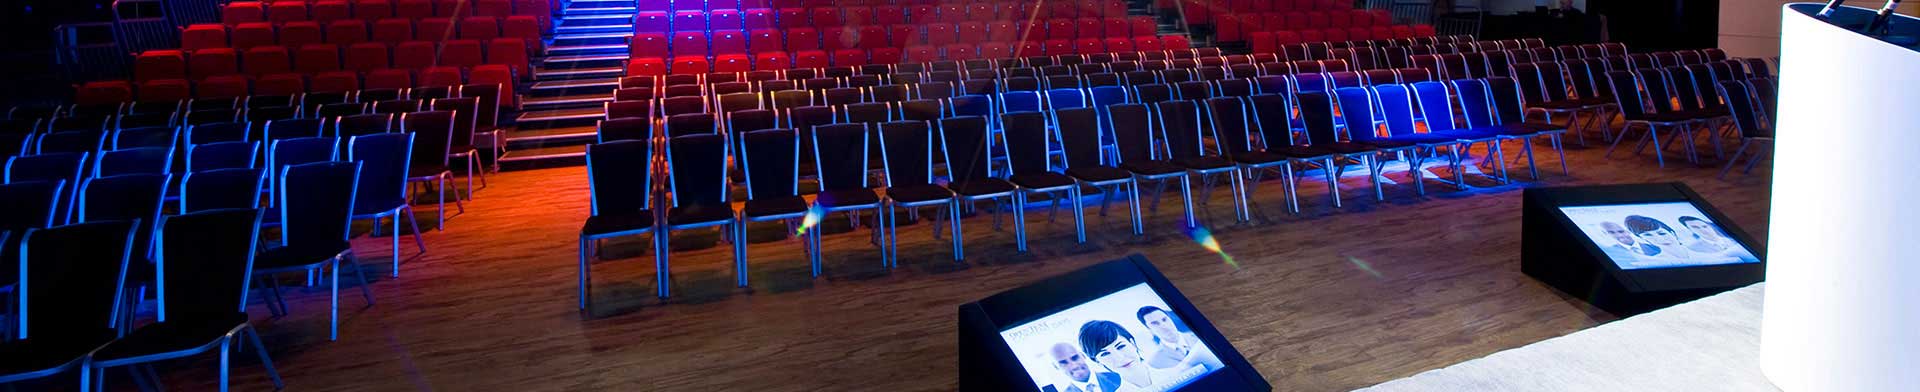 Audio Visual Systems for Auditorium and Event Spaces